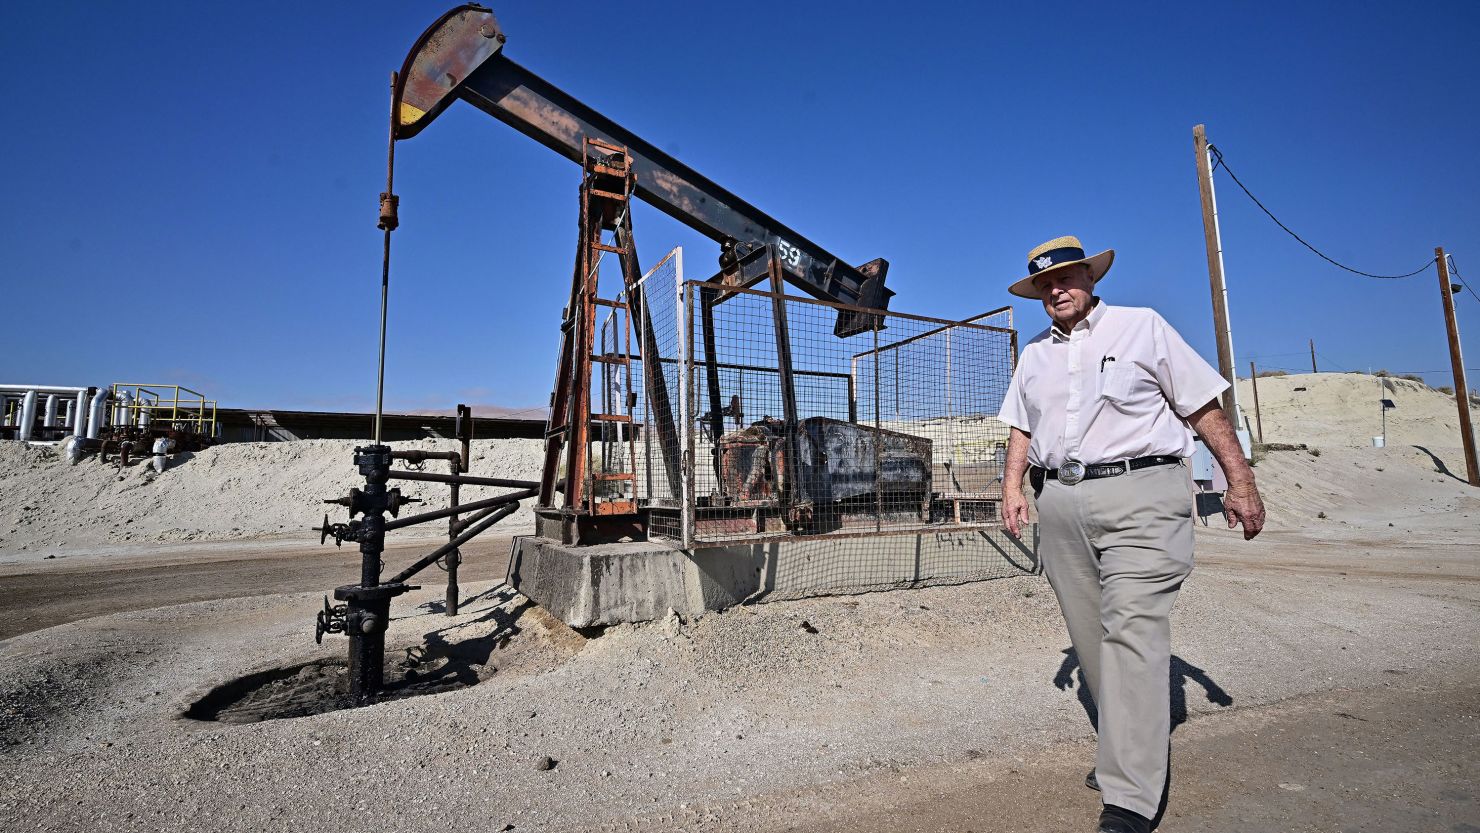 Third-generation oilman Fred Holmes walks past a working pumpjack at his oilfield in Taft, Kern County, California on September 21, 2023. California produces 311,000 barrels of crude oil every day, around 2.4 percent of all US production, making it the seventh largest producing state in the union. But it is also at the leading edge of environmentalism in the United States, and is determined to shrink its dependency. (Photo by Frederic J. BROWN / AFP) (Photo by FREDERIC J. BROWN/AFP via Getty Images)